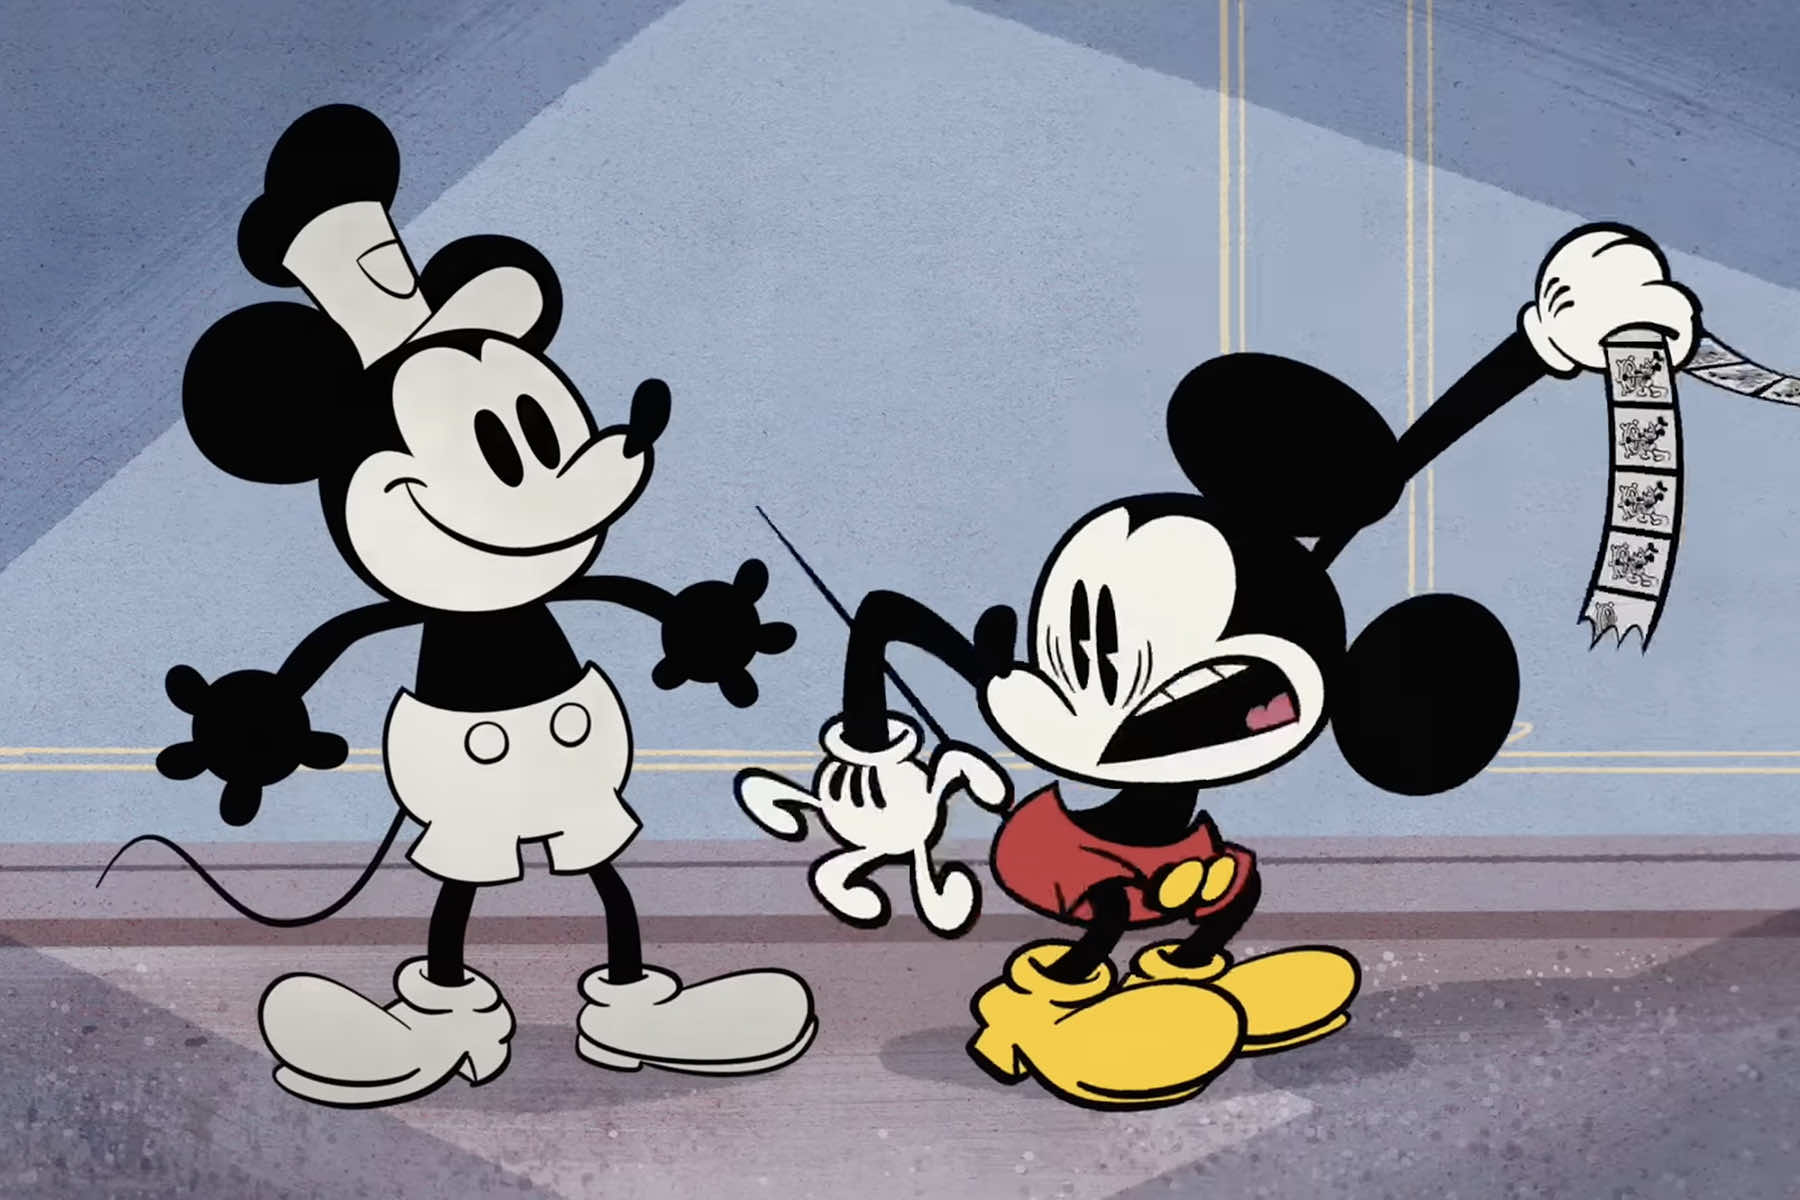 Disney could soon lose exclusive rights to Mickey Mouse, Walt Disney  Company